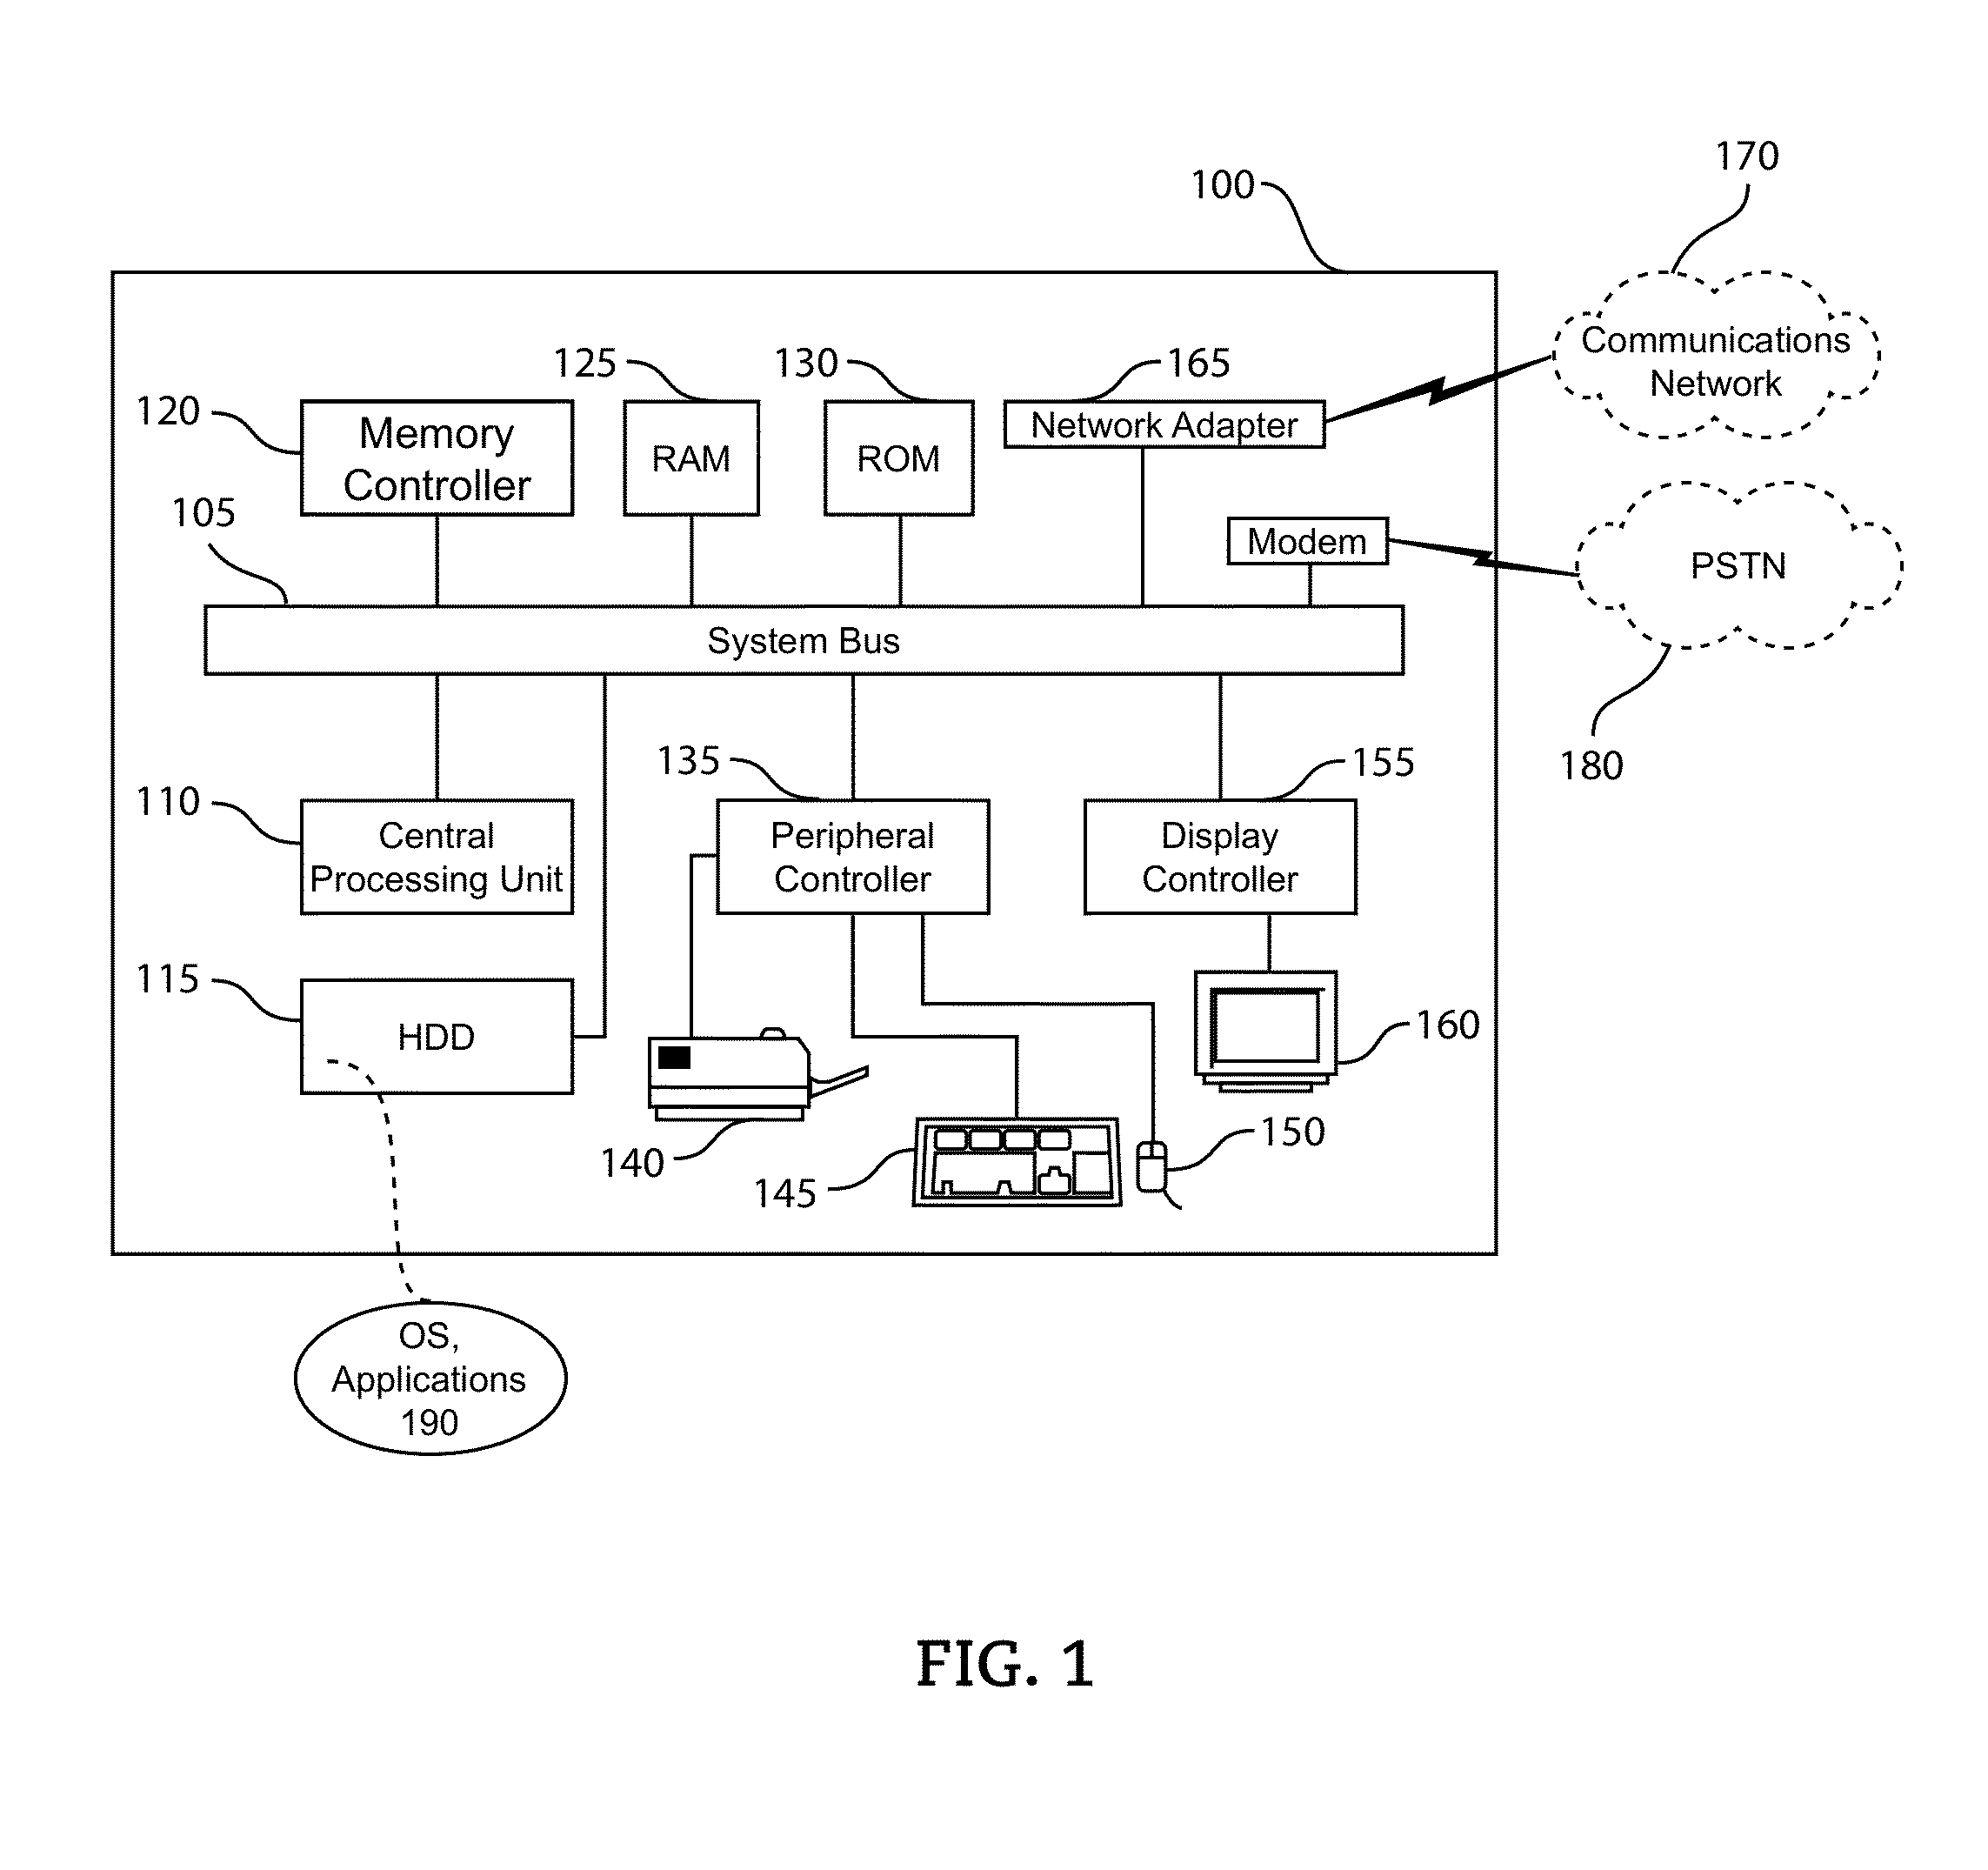 Engine, system and method of providing vertical social networks for client oriented service providers